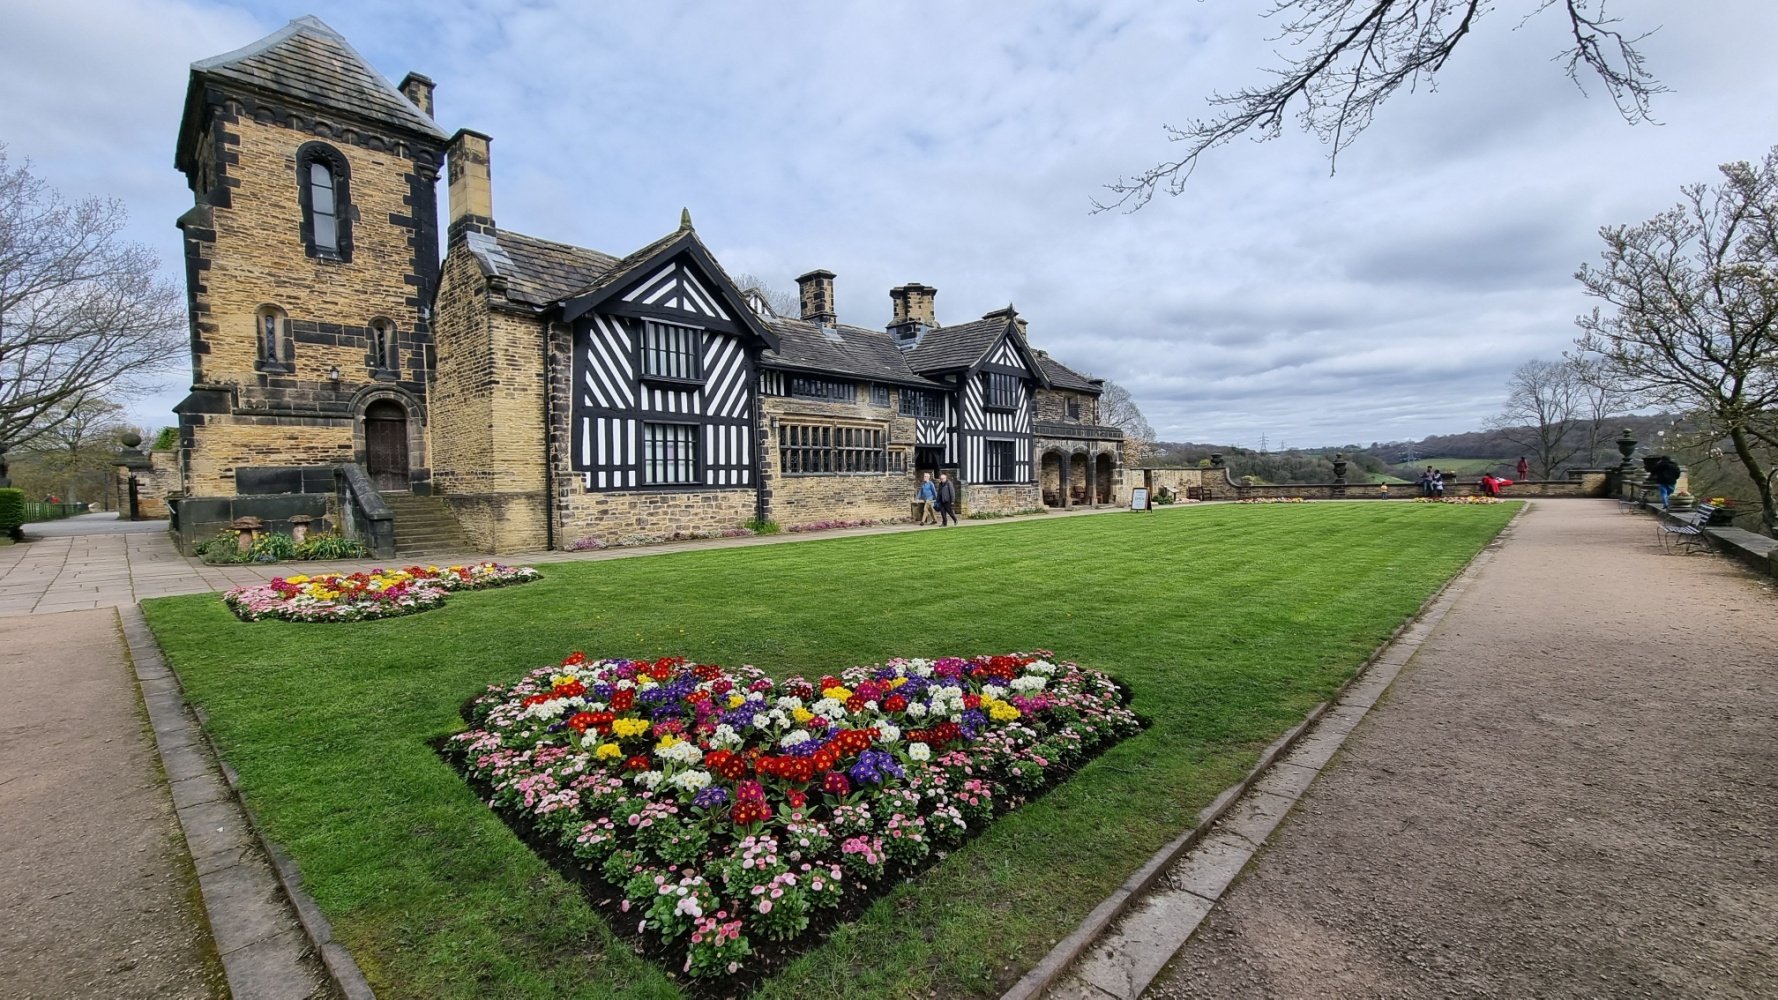 Image name shibden hall halifax west yorkshire the 15 image from the post A look at the history of Shibden Hall, with Dr Emma Wells in Yorkshire.com.